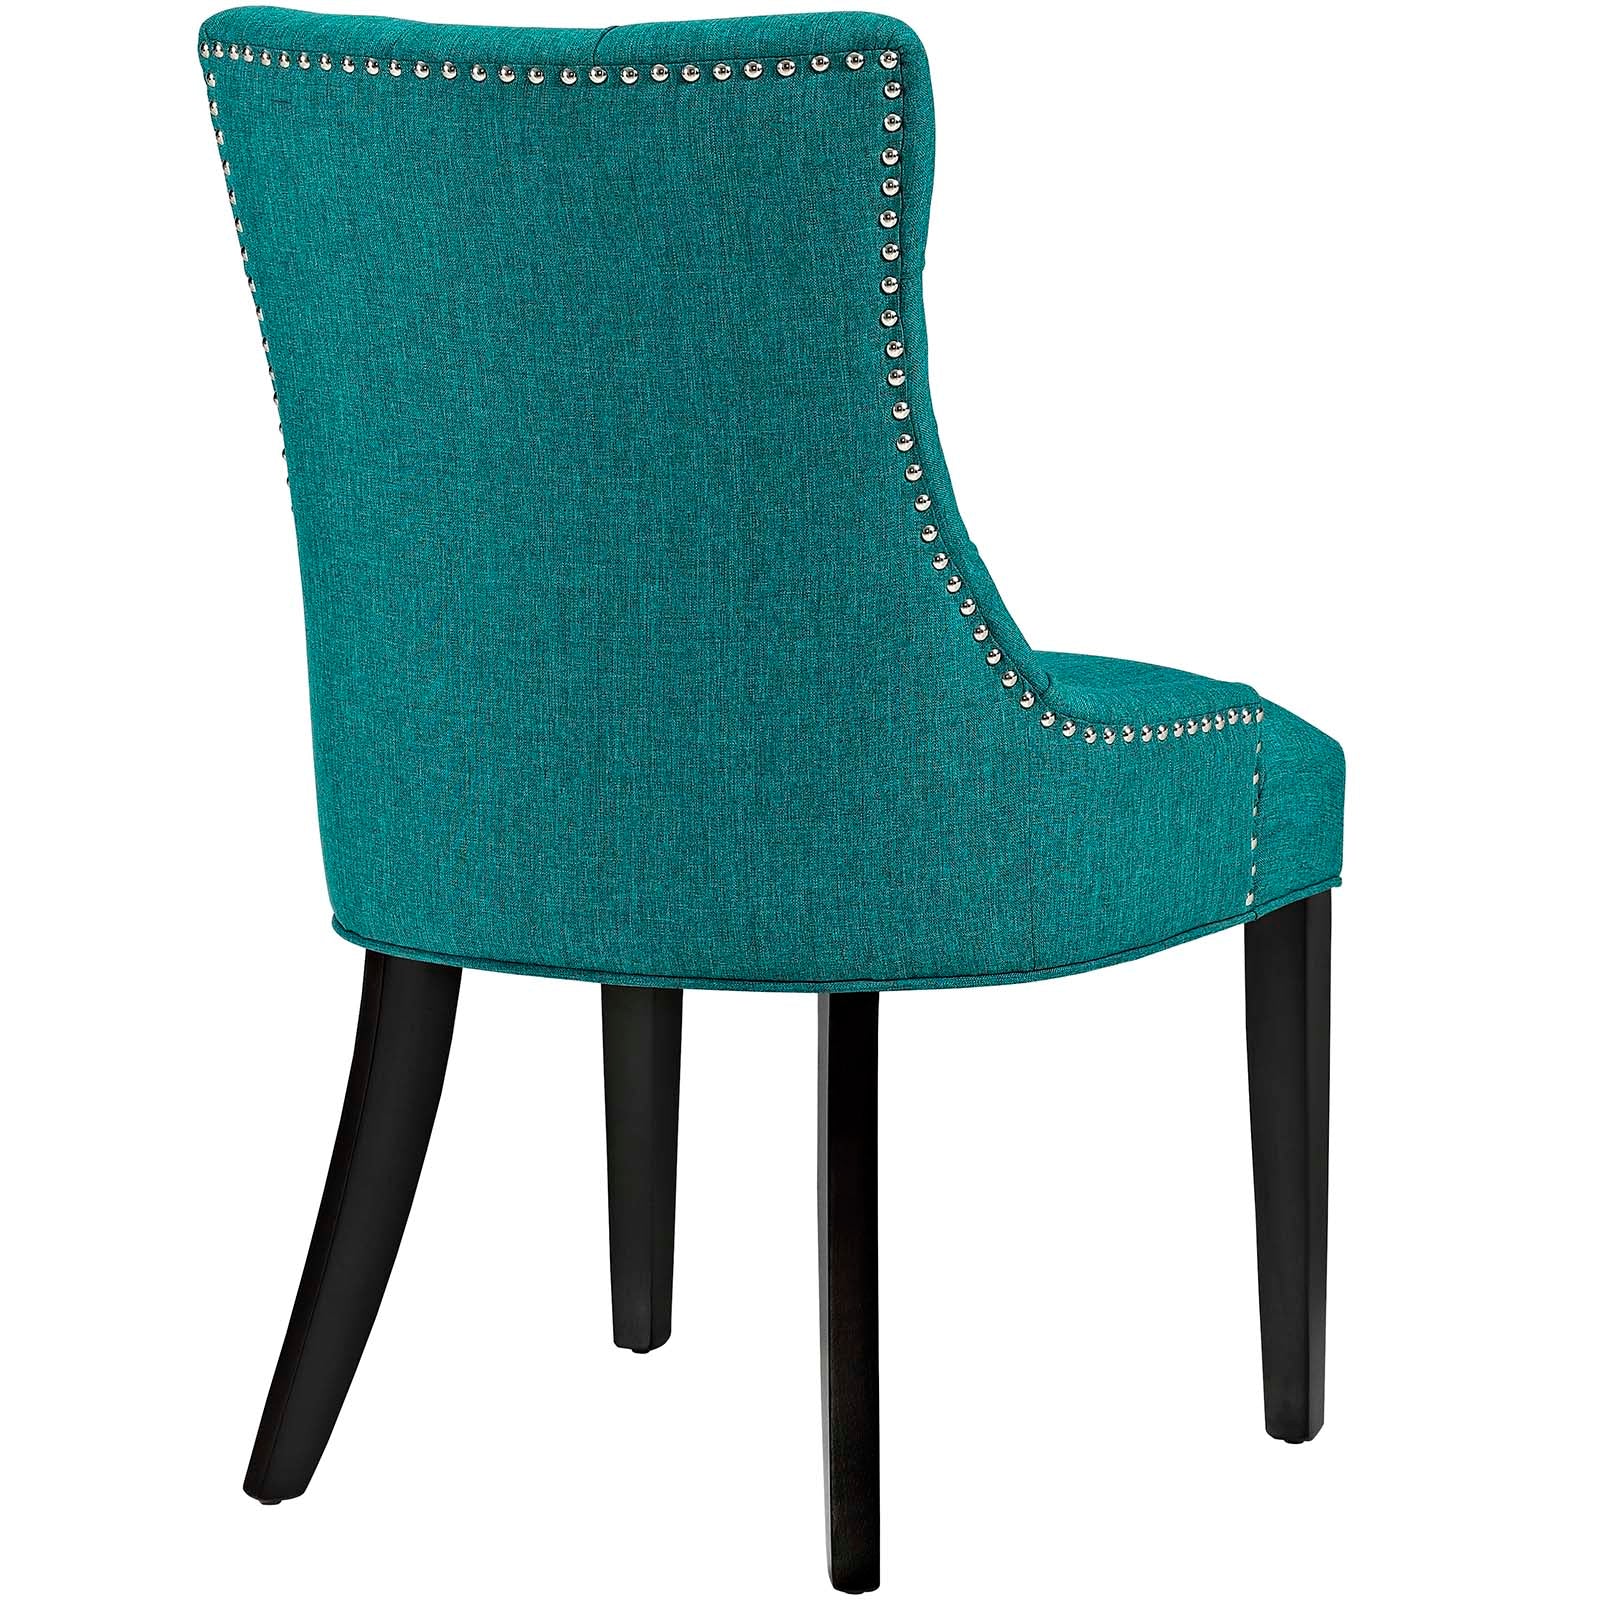 Modway Dining Chairs - Regent Dining Side Chair Fabric Teal (Set of 2)